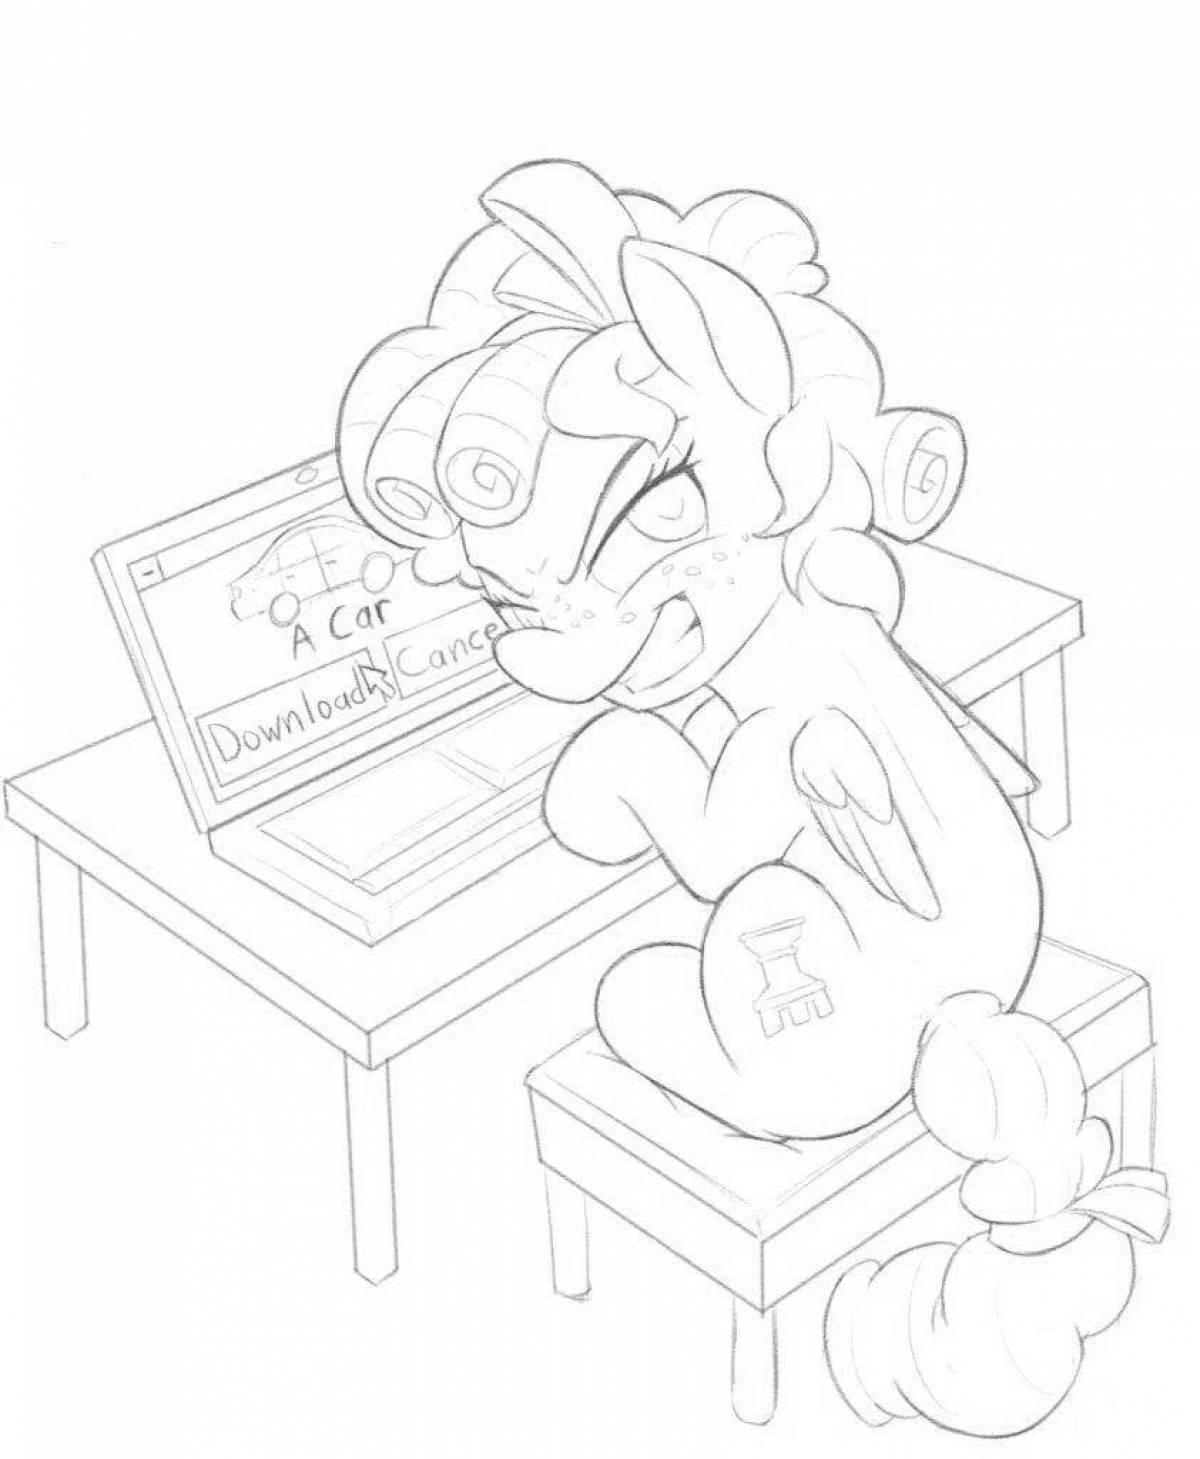 Violent pony playtime coloring book